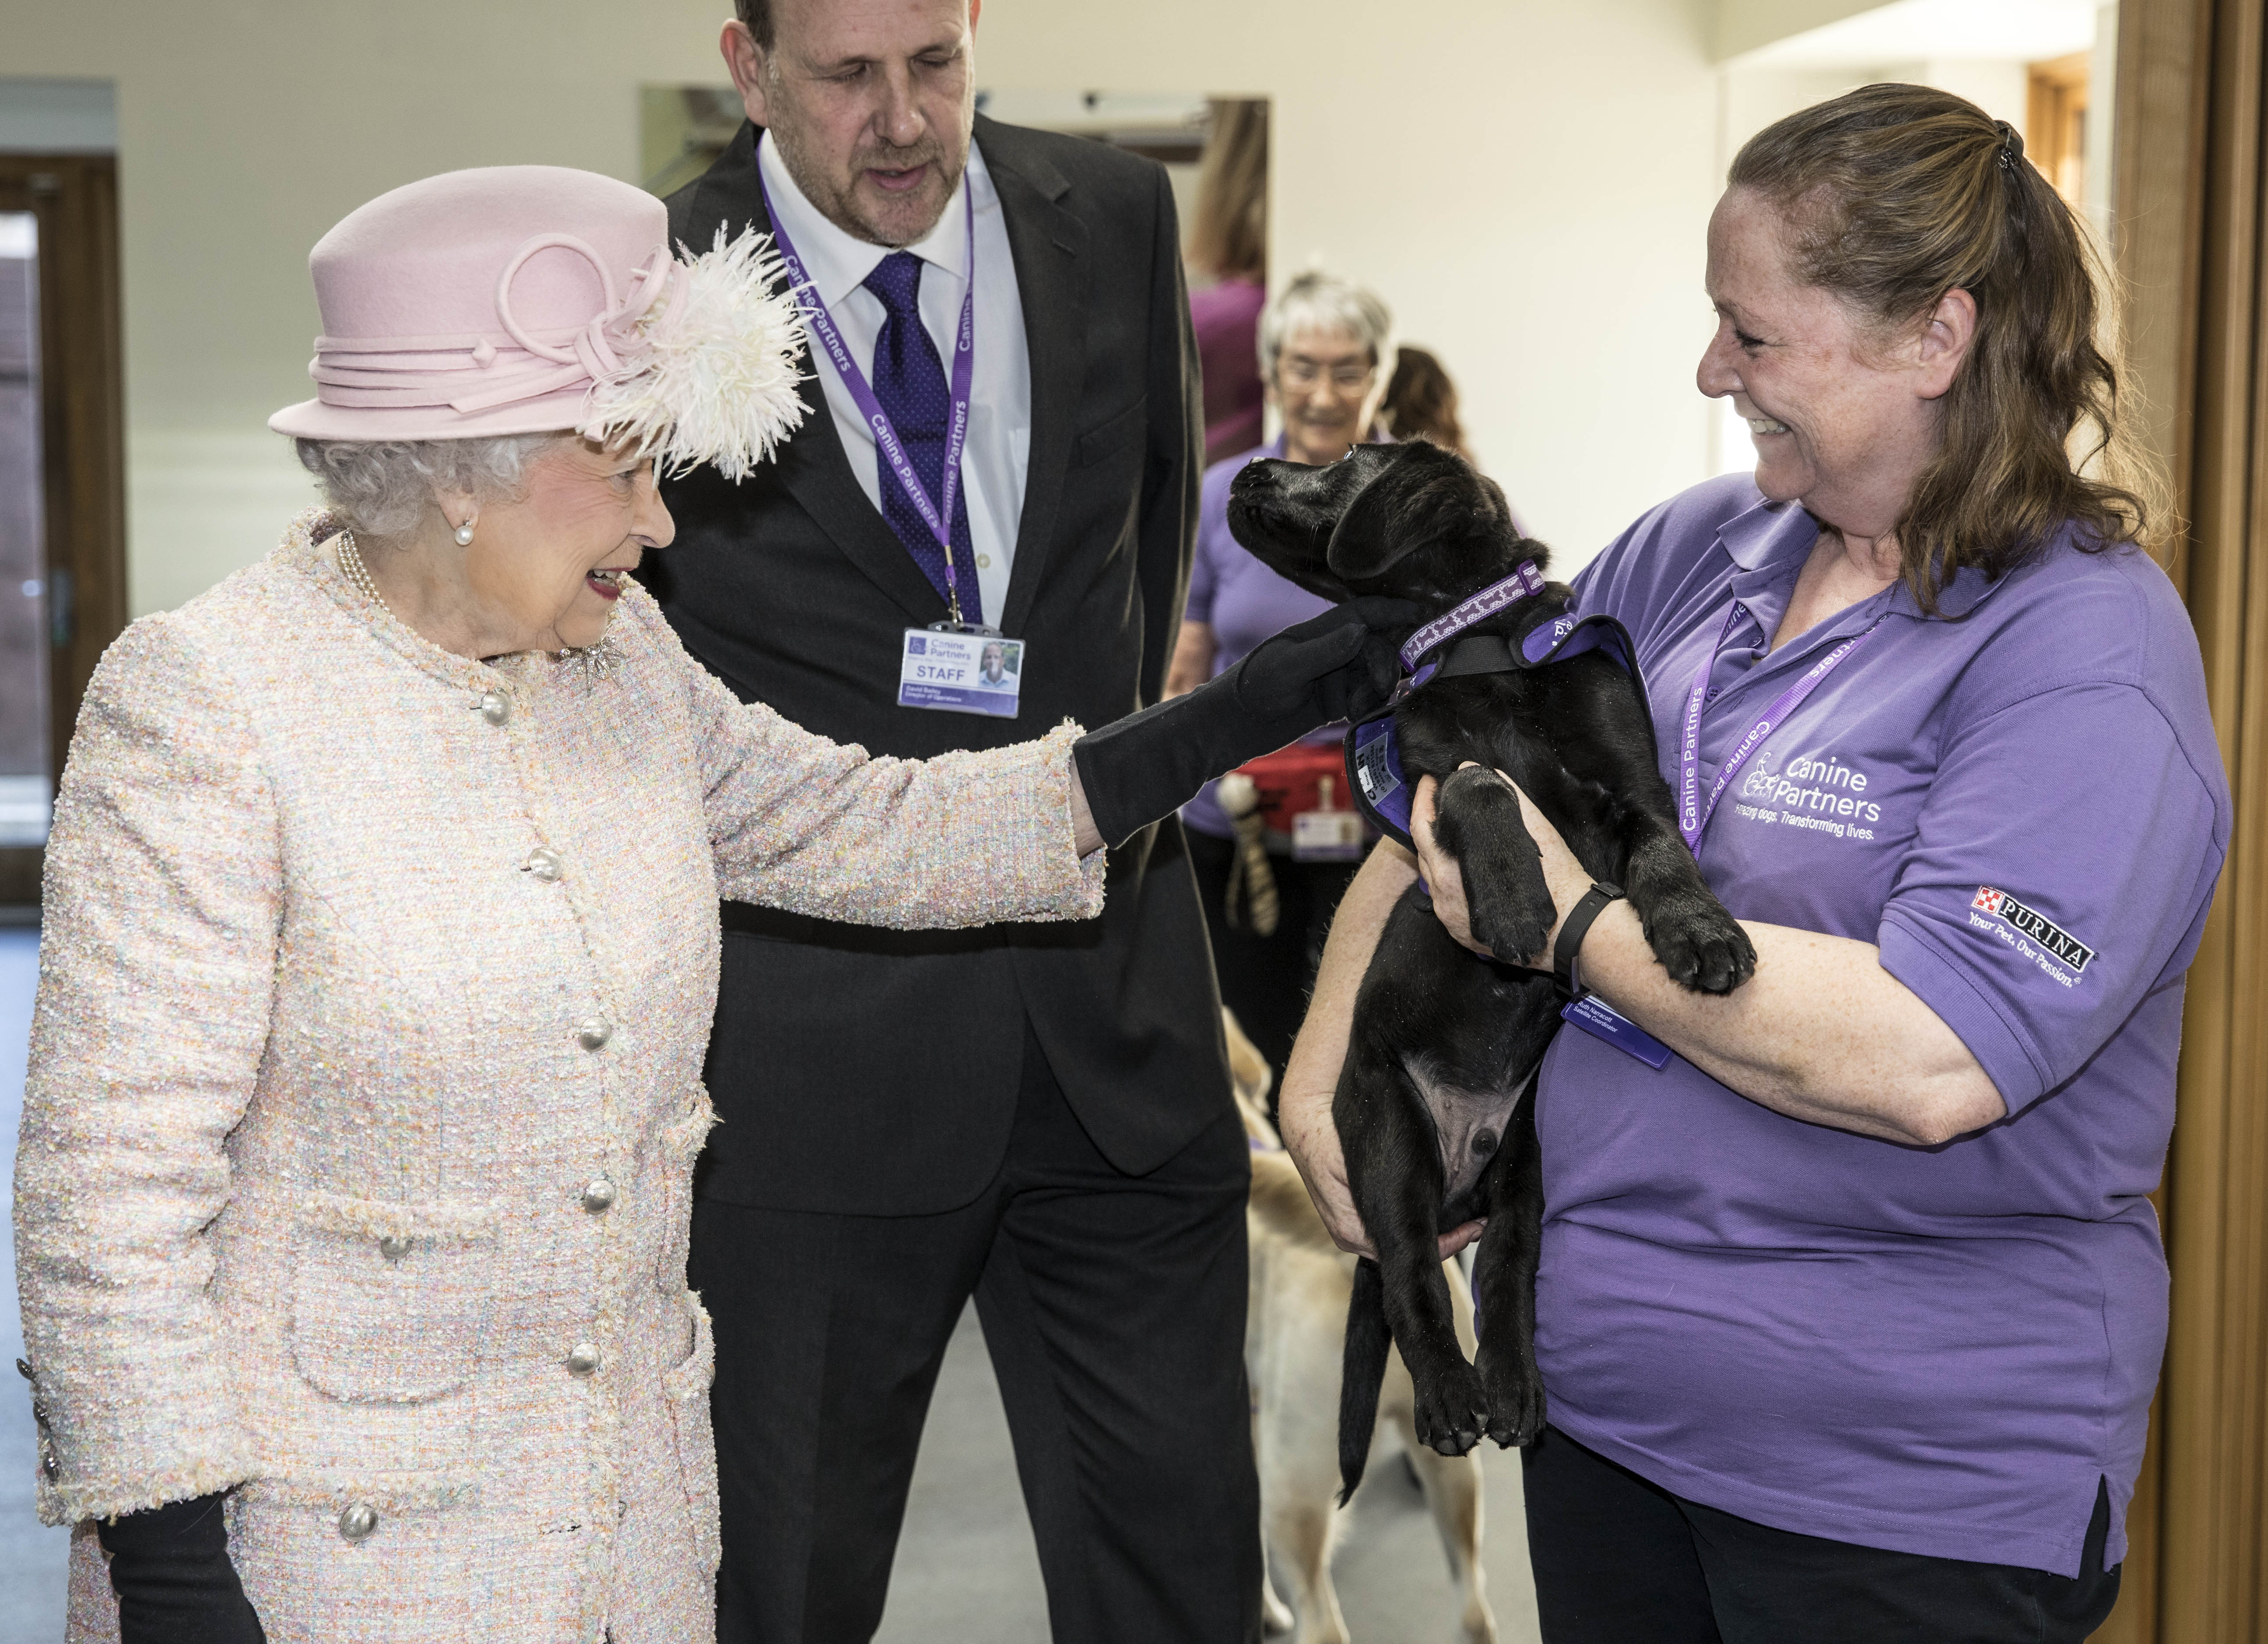 Queen Elizabeth II is introduced to 12 week old Labrador puppy "Flint" by her trainer Ruth Narracott as she tours the facilities at "Canine Partners" charity in Midhurst in Sussex.